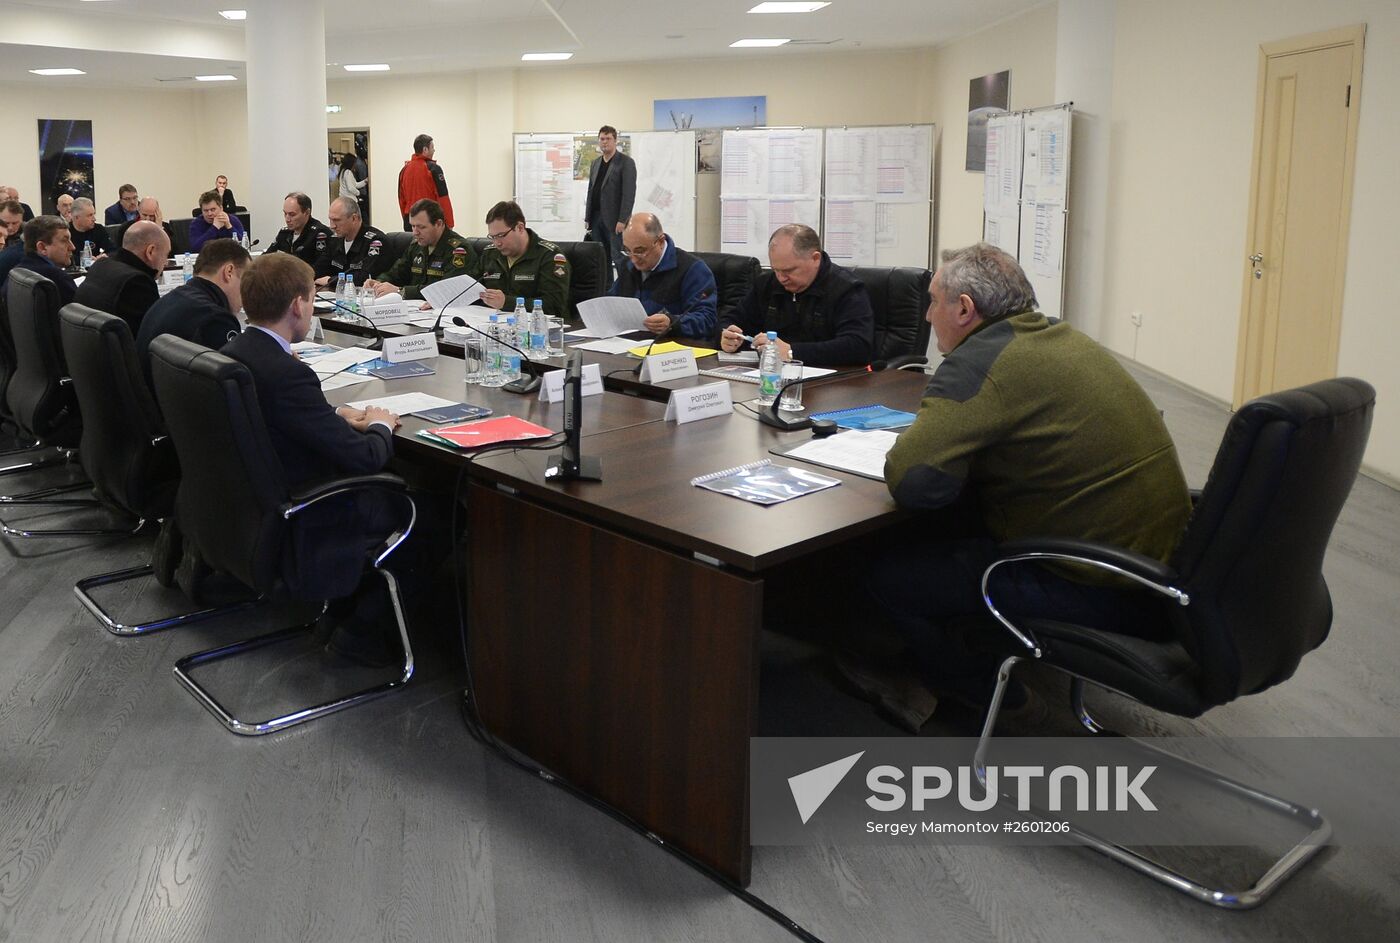 Dmitry Rogozin meets with builders at the unfinished Vostochny (Eastern) space center